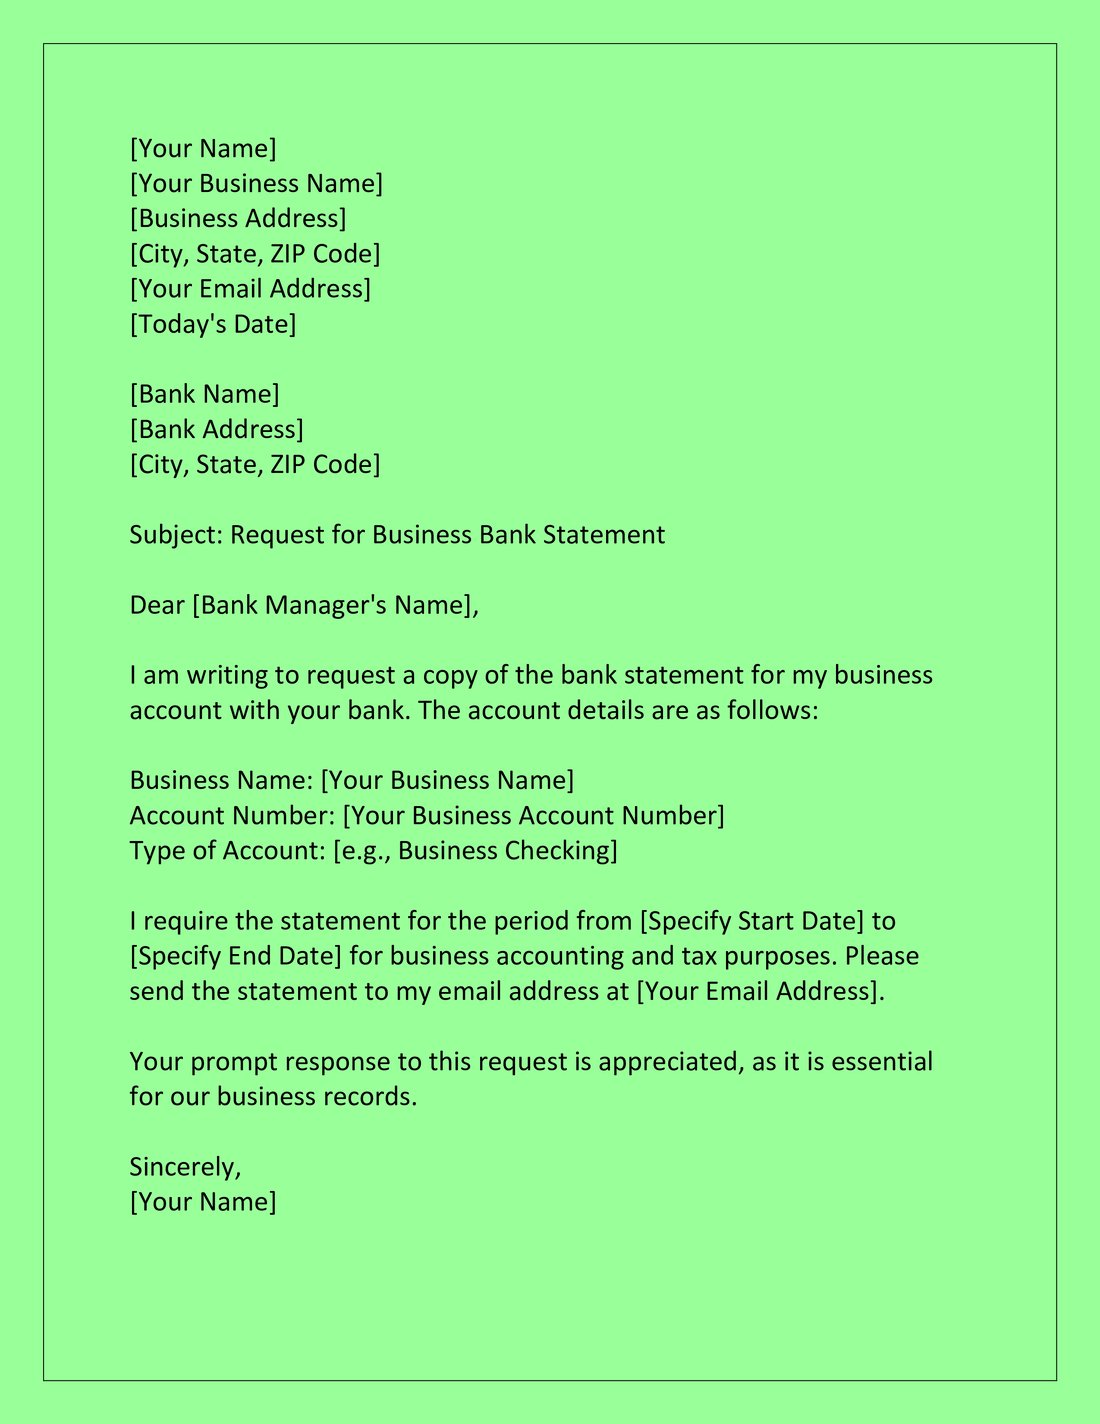 Bank Statement Request Letter for Business Purposes